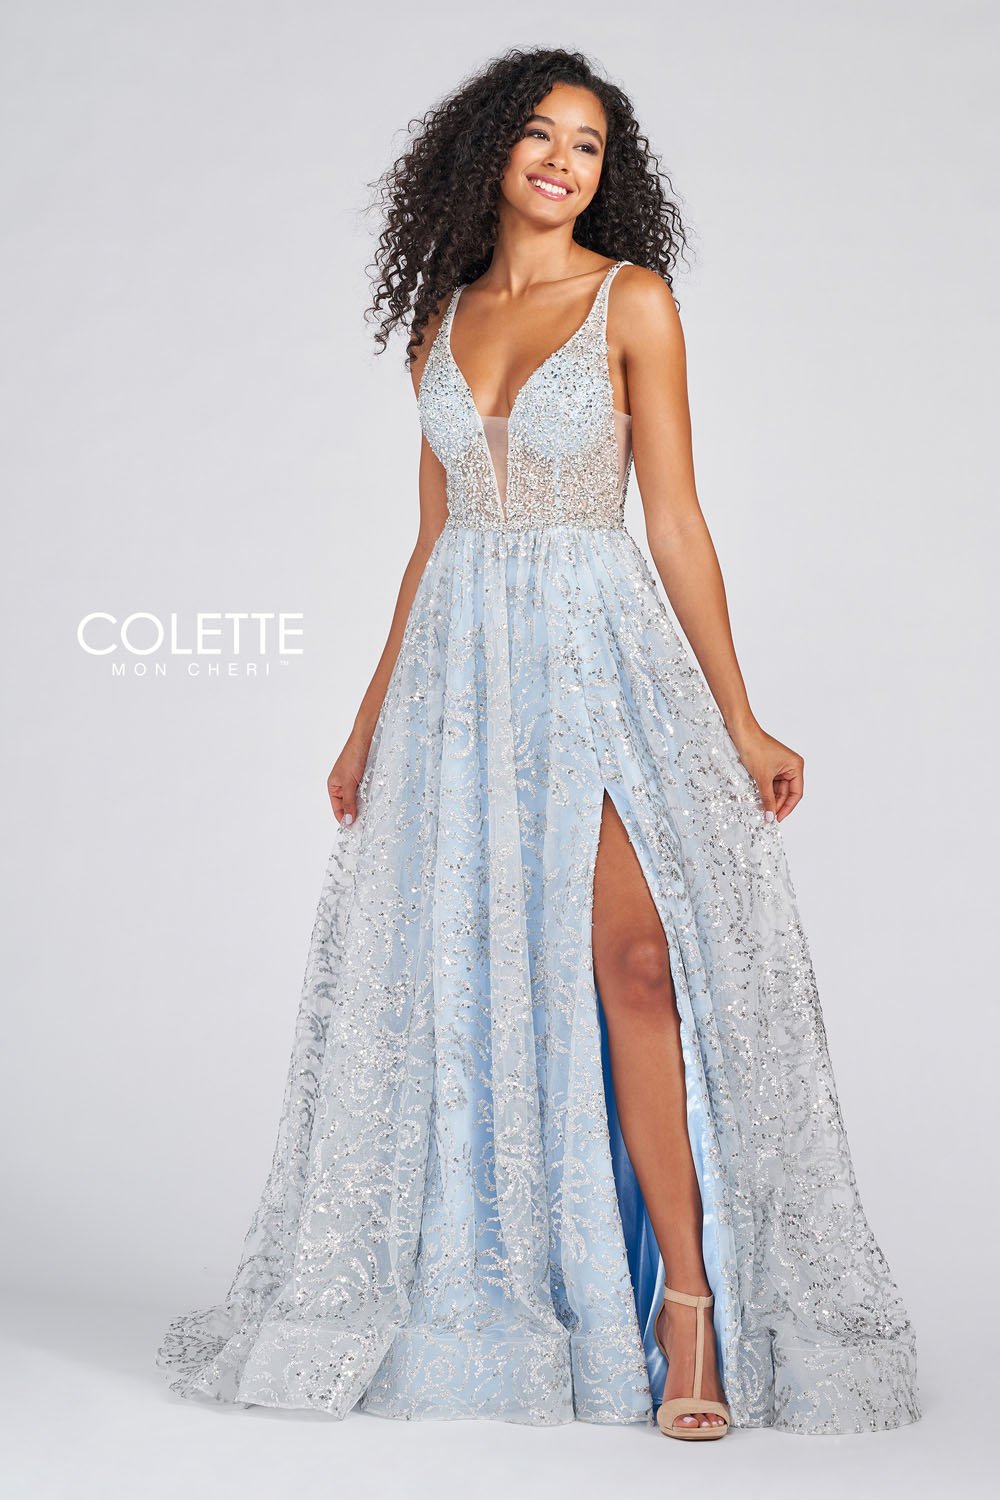 Colette CL12257 Ice Blue Silver prom dresses.  Ice Blue Silver prom dresses image by Colette.